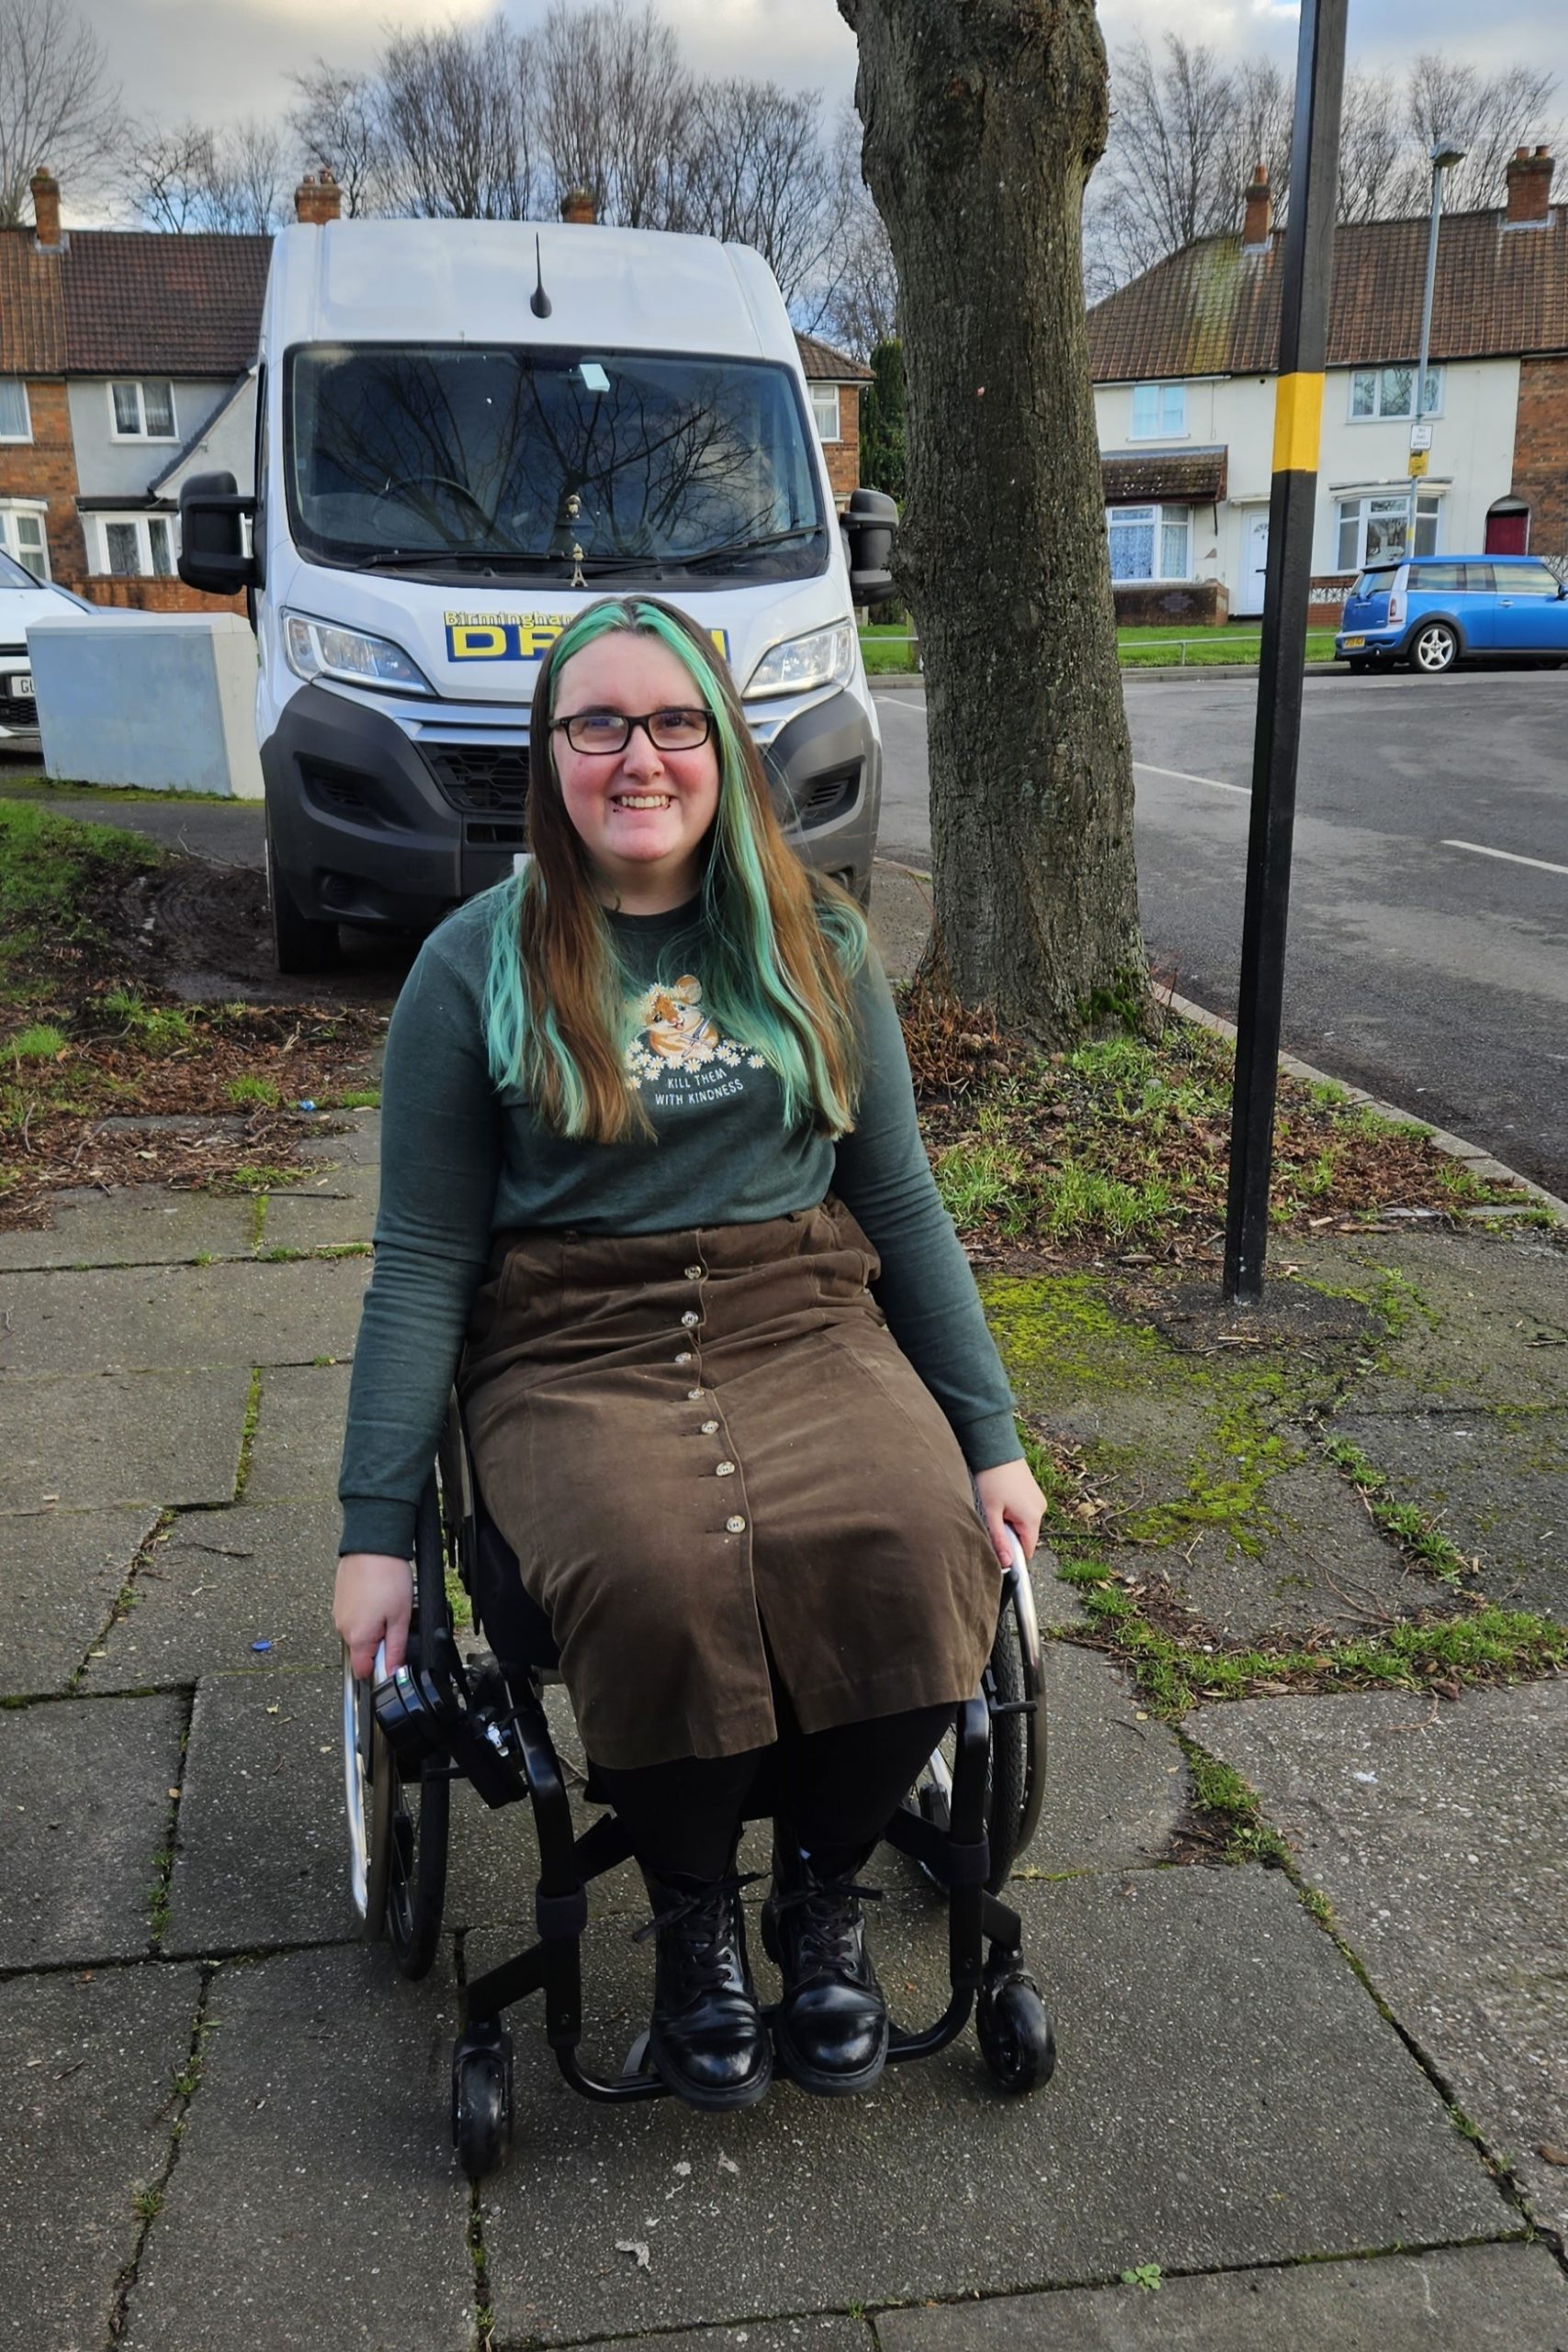 Rowan Stansfield, a partially sighted wheelchair user, is in front of a white transit van which has parked on the pavement making it difficult to pass.